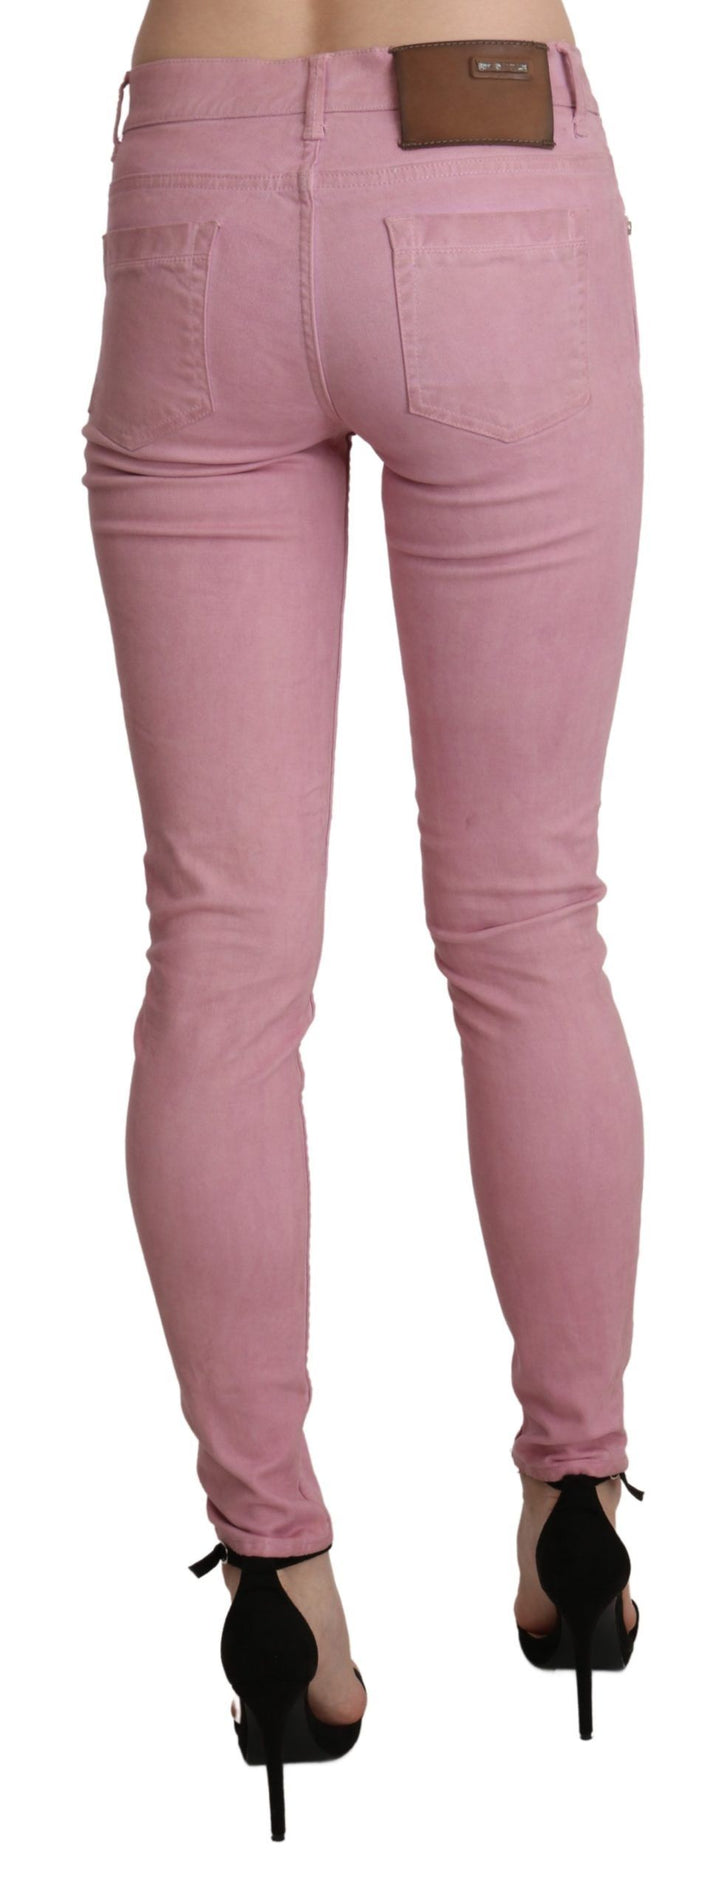 Acht Chic Pink Mid Waist Skinny Jeans